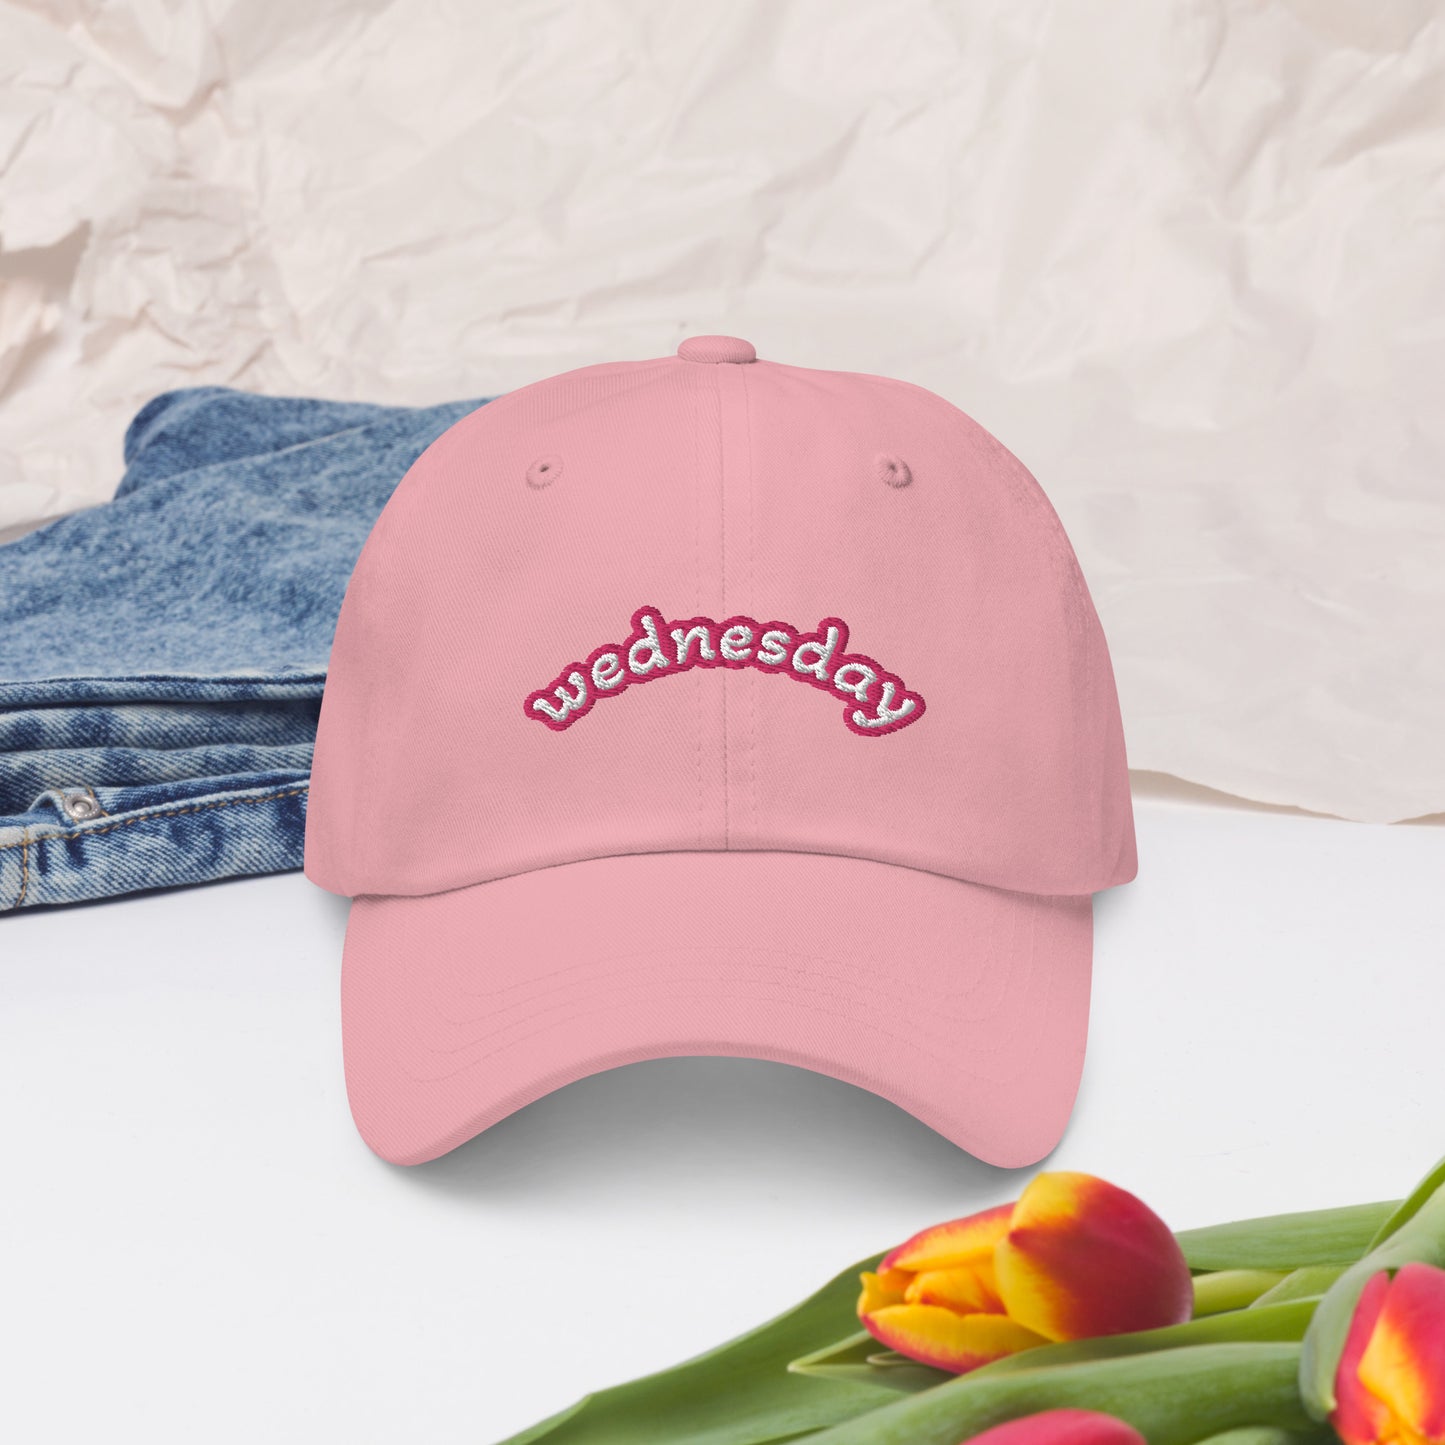 Wednesday | Dad Hat | Embroidered